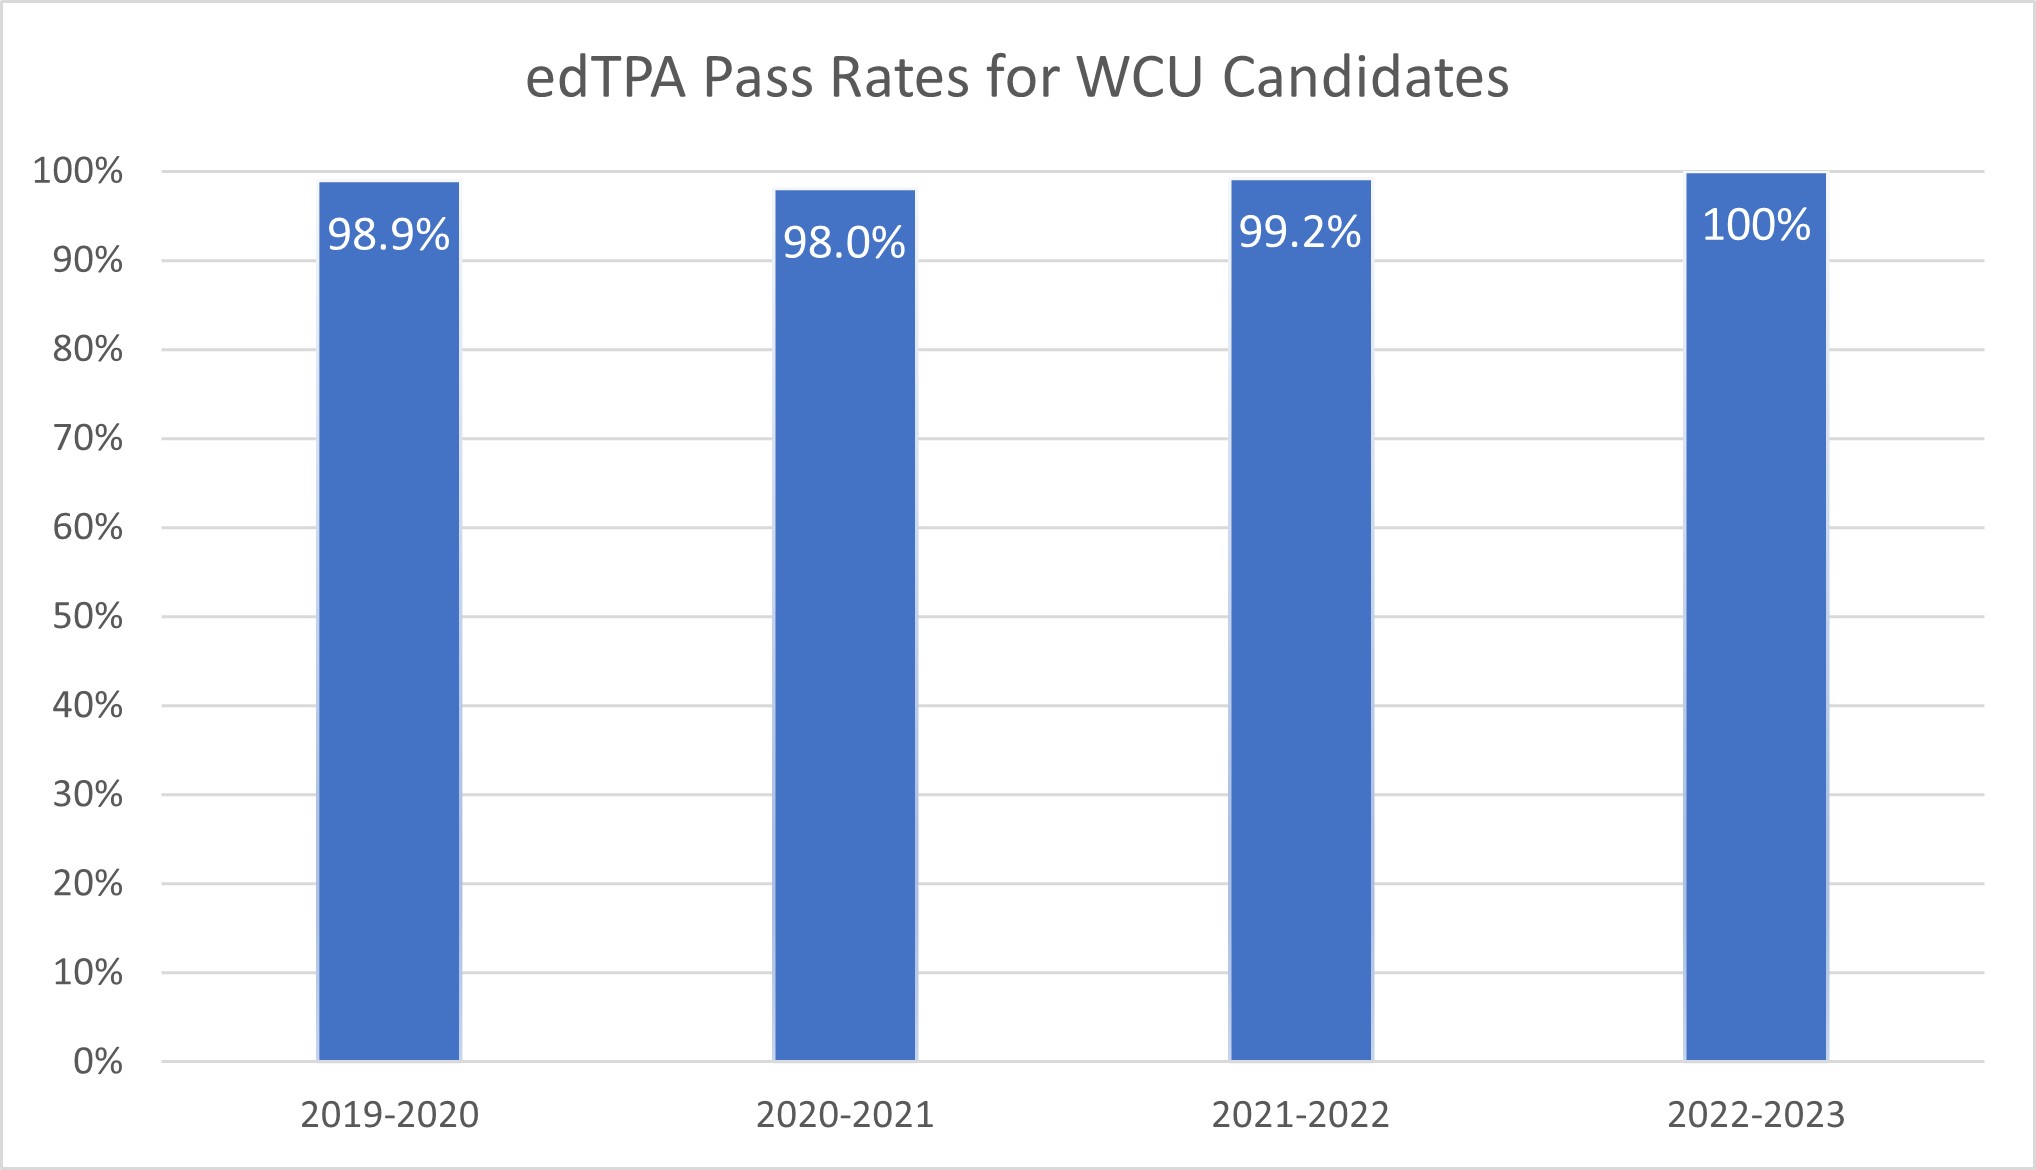 Graph indicating pass rates for edTPA scores that range from 96% to 98% for the past three academic years